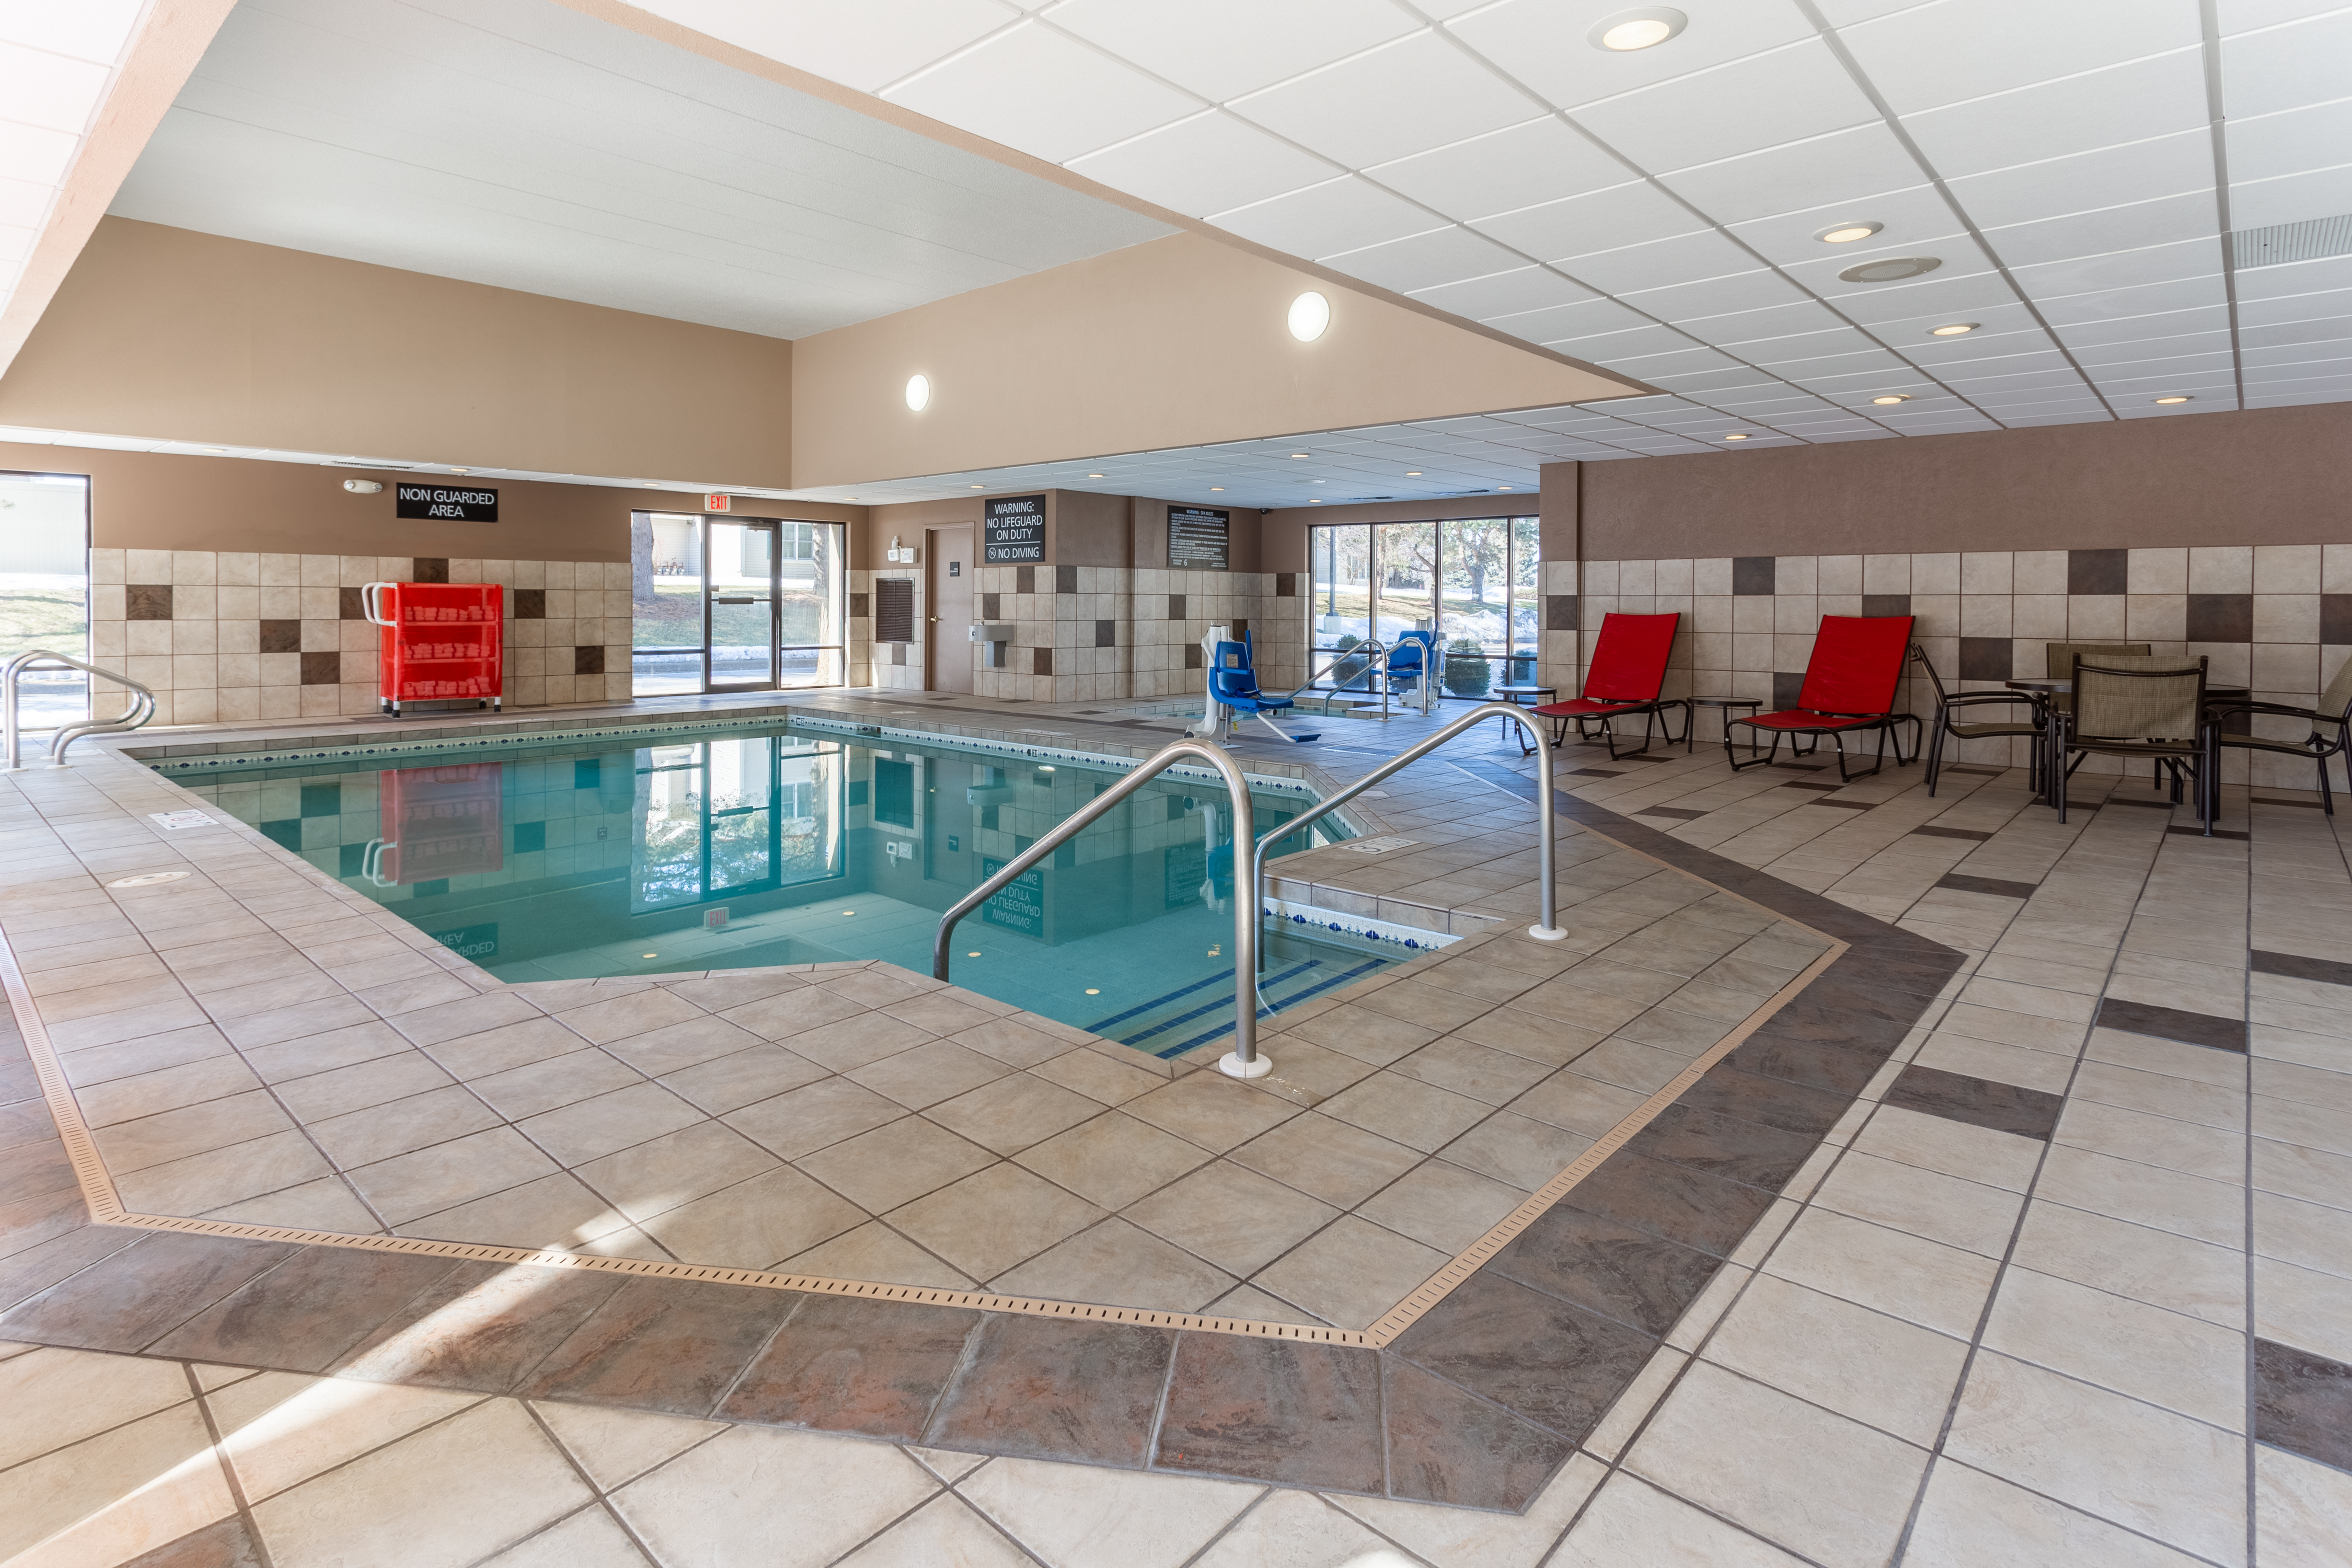 Indoor pool for year round use